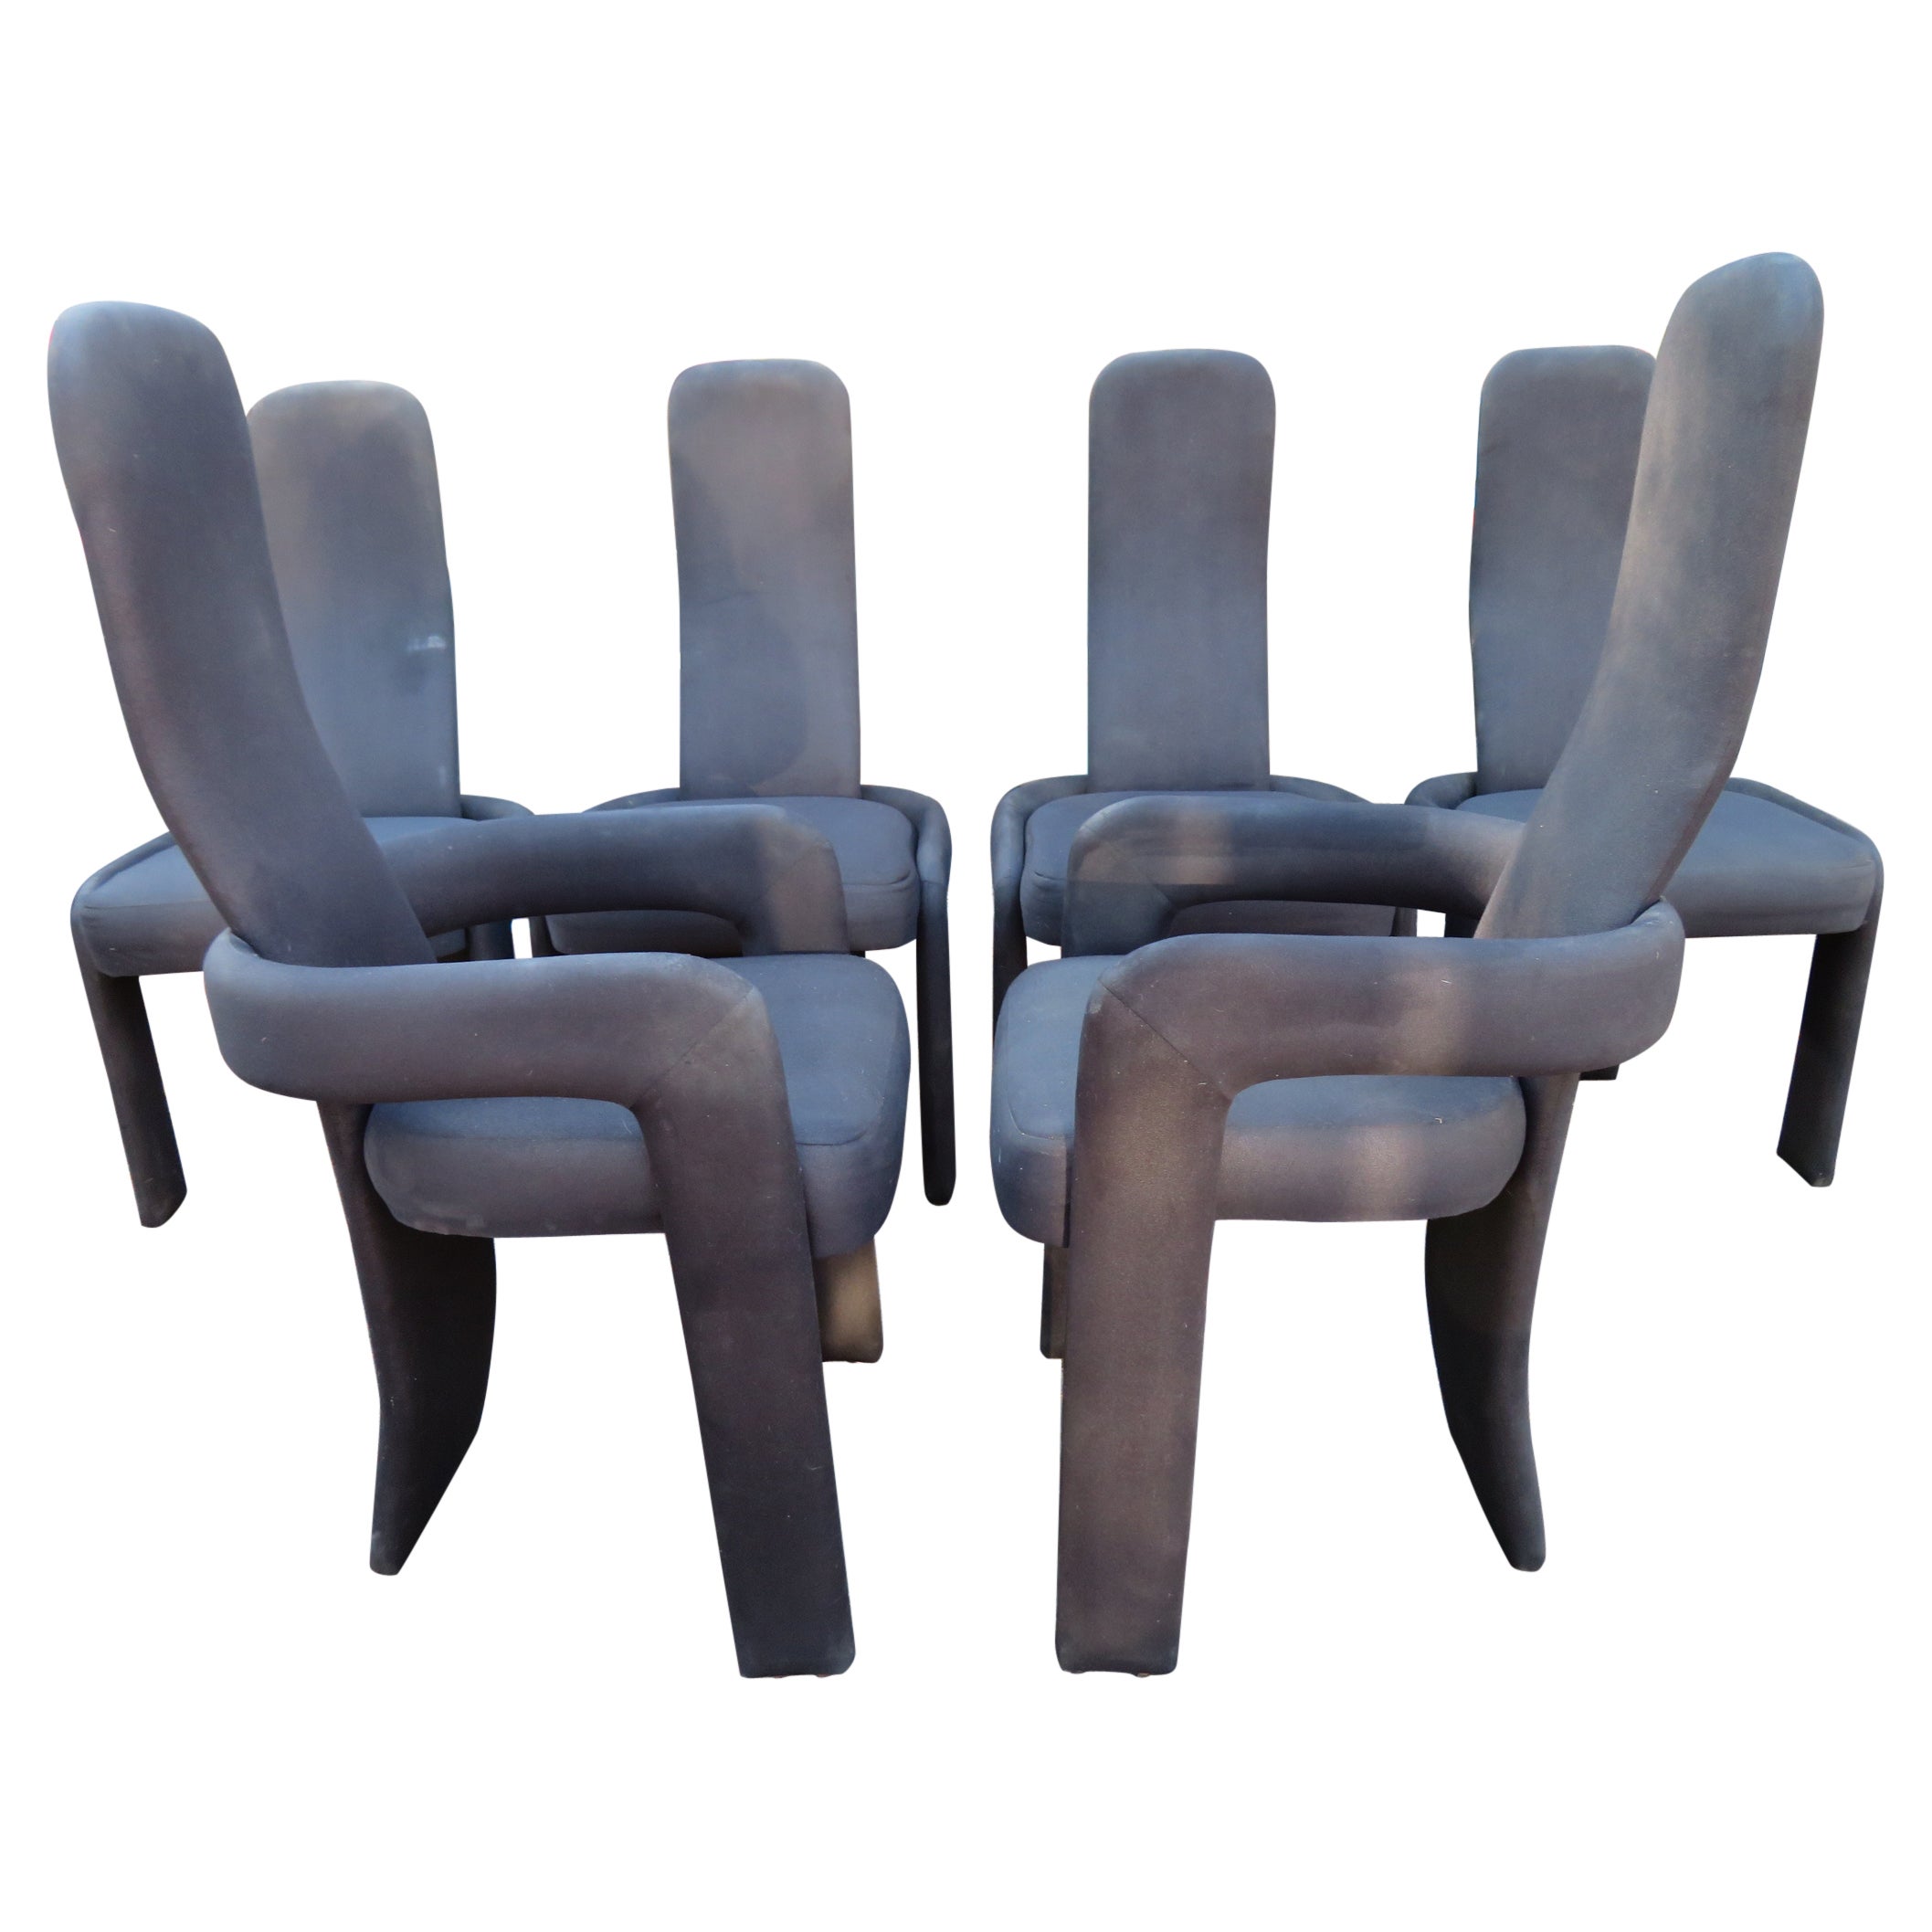 Fabulous Statuesque Set of 6 Sculptural Postmodern Dining Chairs  For Sale